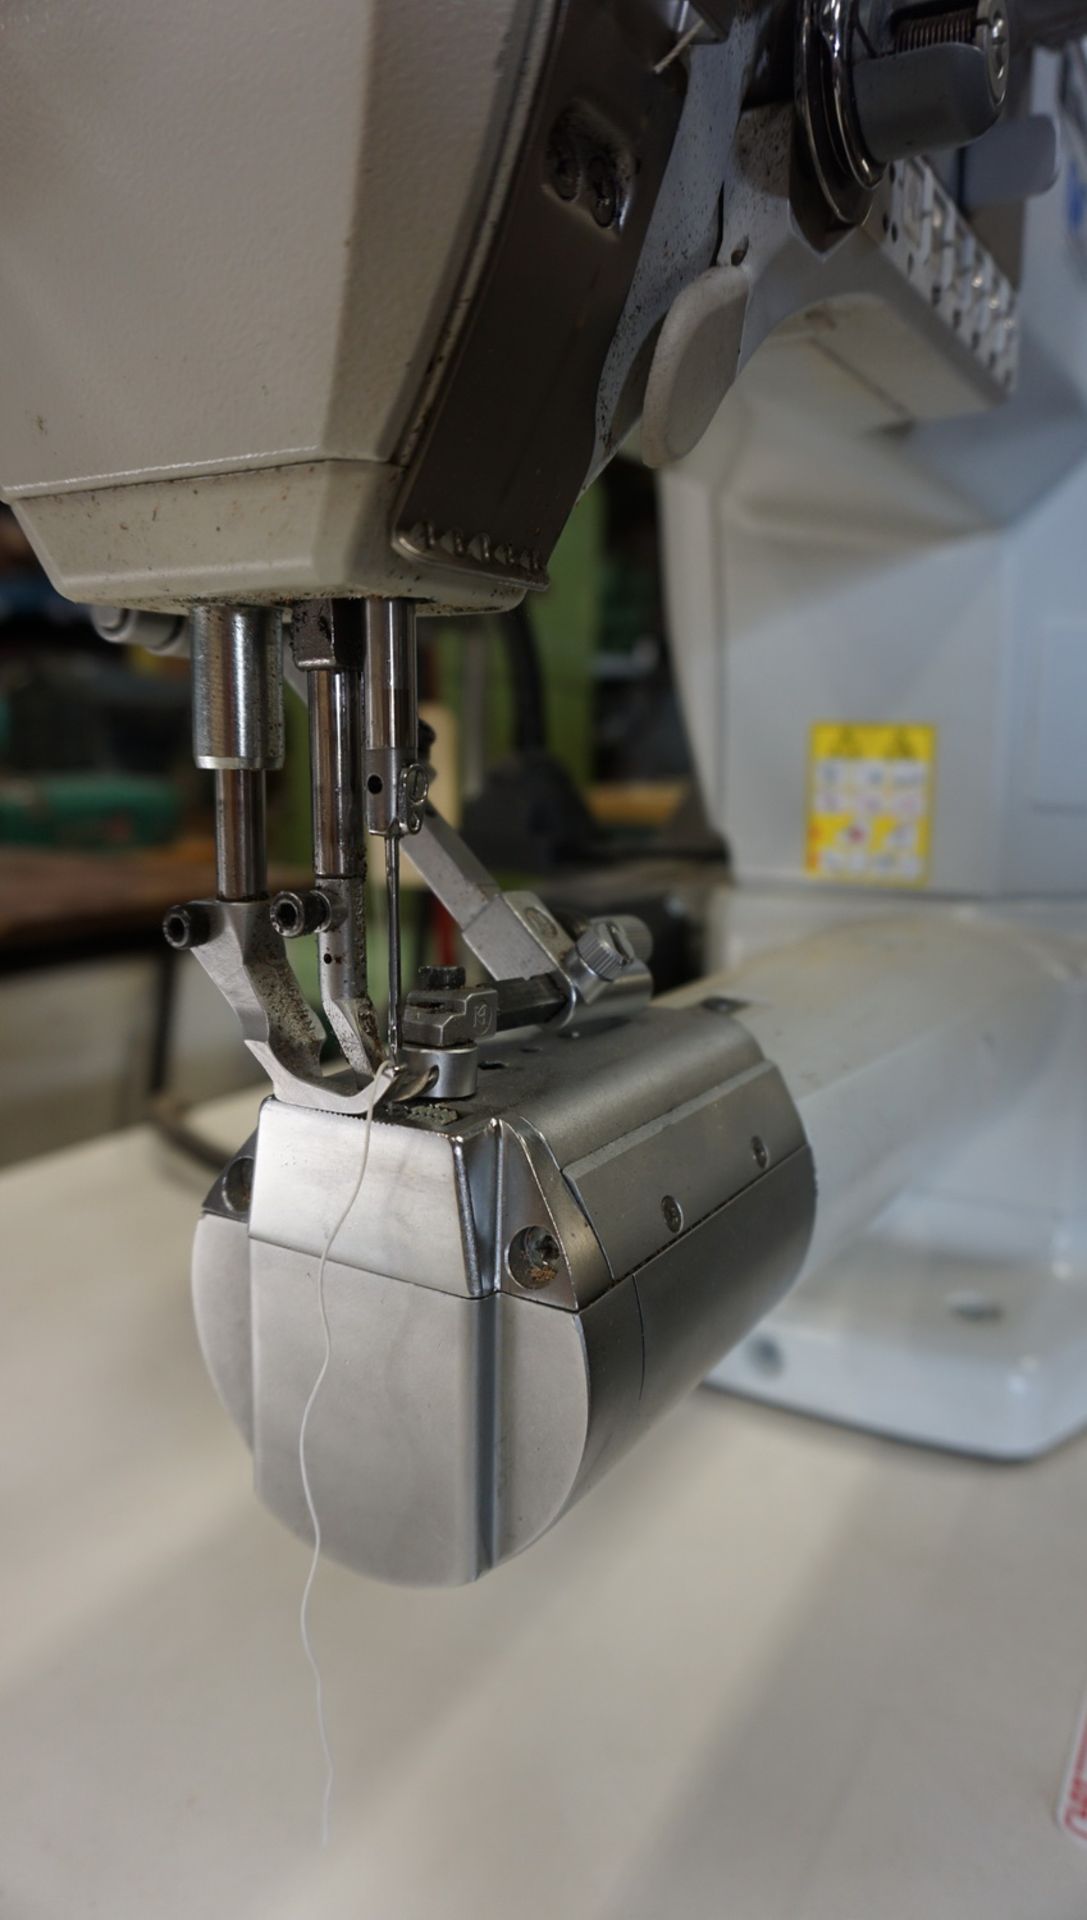 DURKOPP ADLER 869 CLASS 990002 CYLINDER ARM WALKING FOOT SEWING MACHINE W/ FOOT CONTROL, BACK - Image 3 of 5